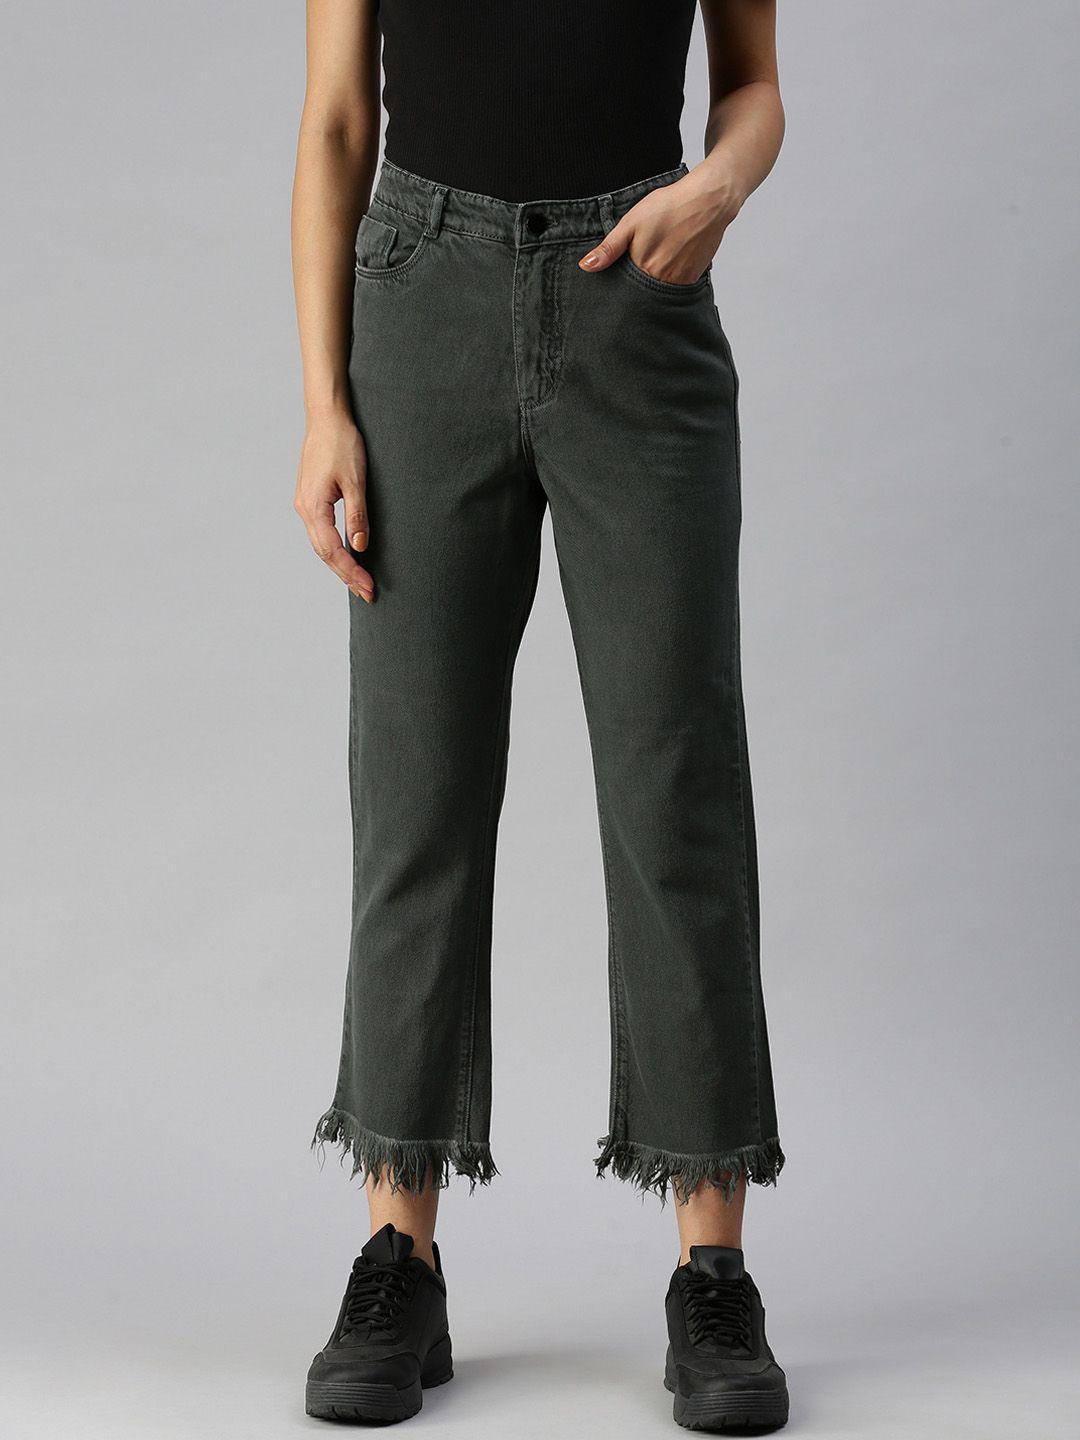 showoff women olive green relaxed fit high-rise stretchable jeans